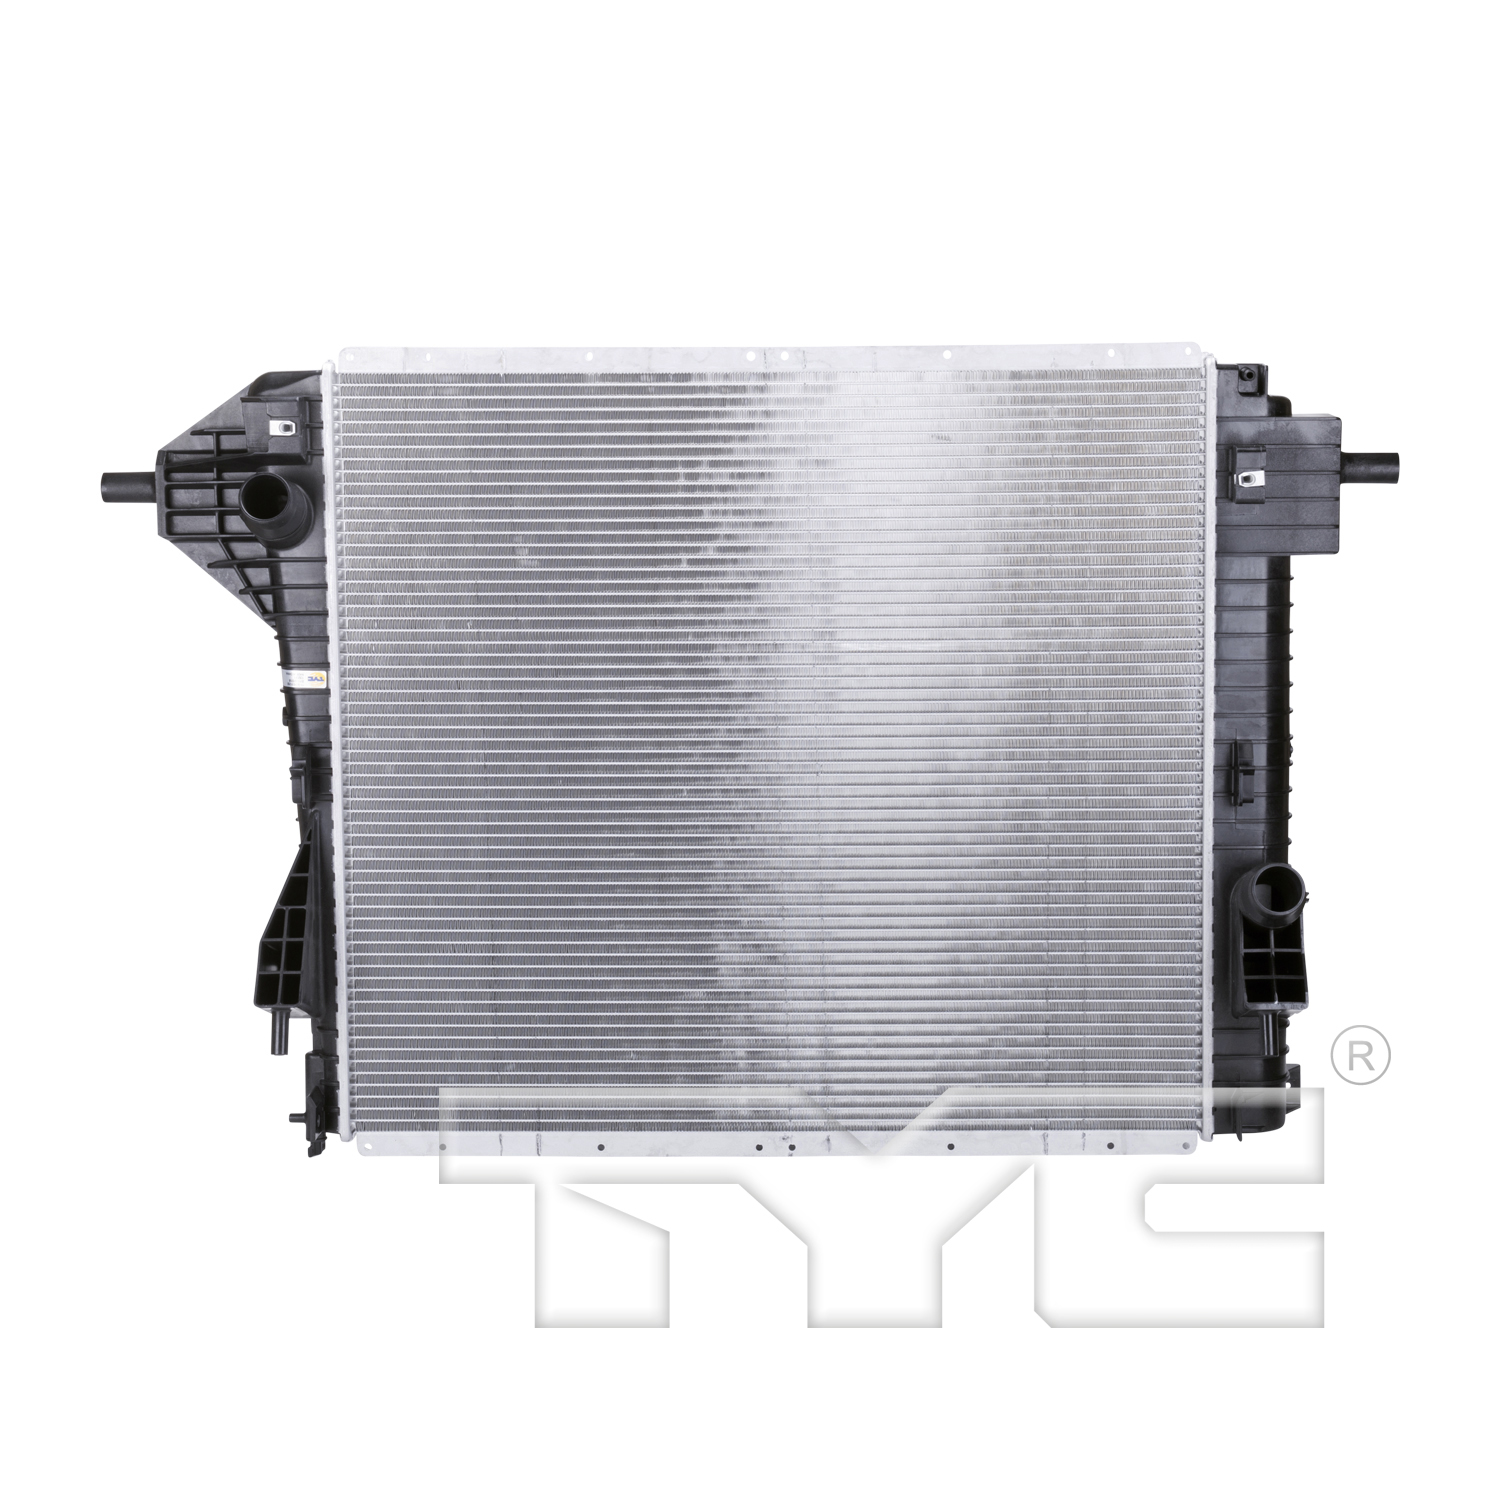 Aftermarket RADIATORS for FORD - F-250 SUPER DUTY, F-250 SUPER DUTY,11-16,Radiator assembly